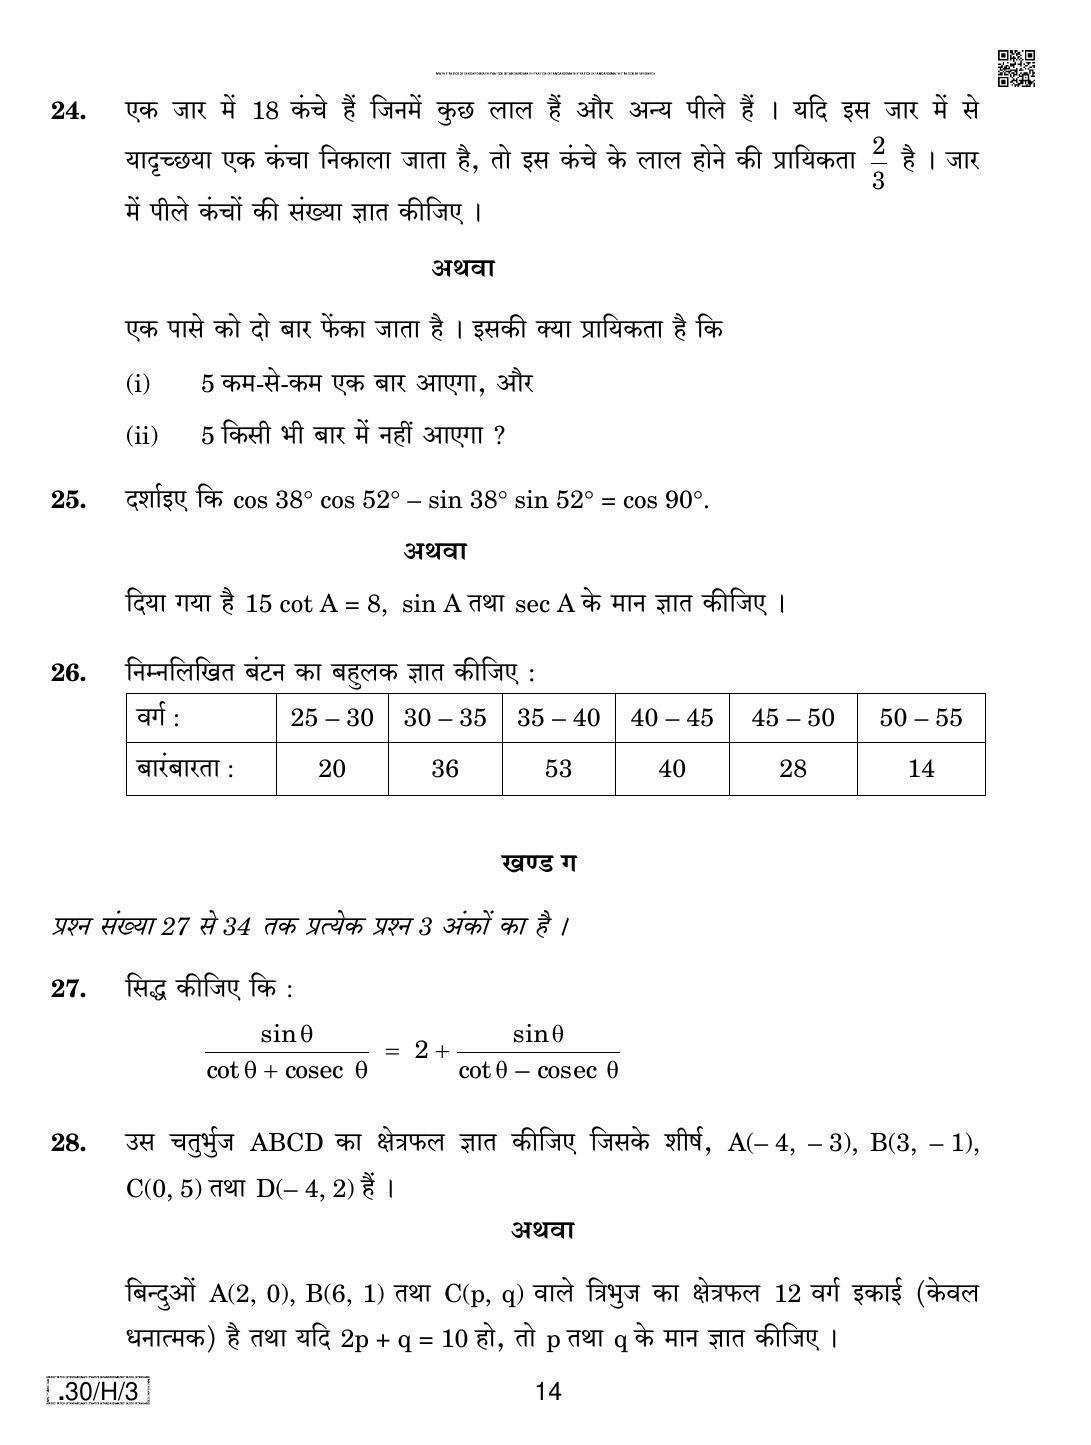 CBSE Class 10 30-C-3 - Maths (Standard) 2020 Compartment Question Paper - Page 14